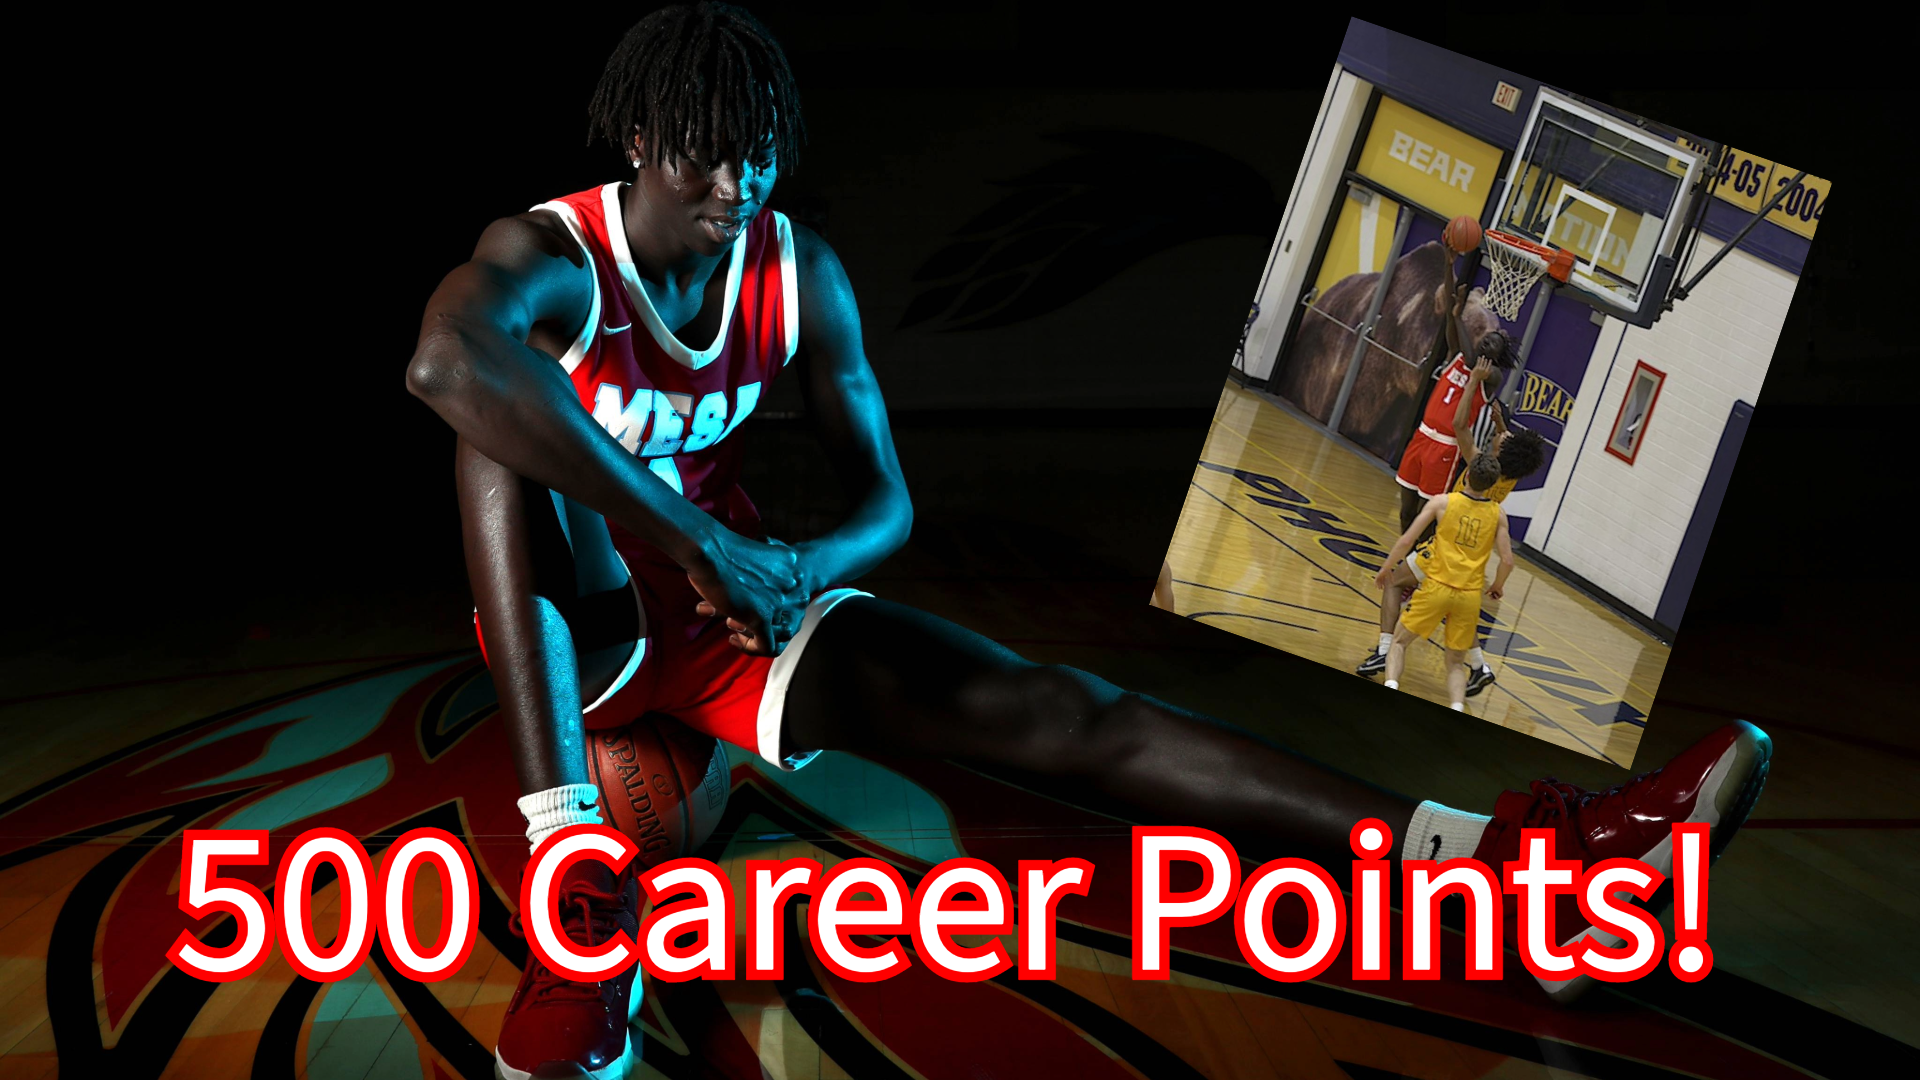 Lual Lual scores his 500th career point